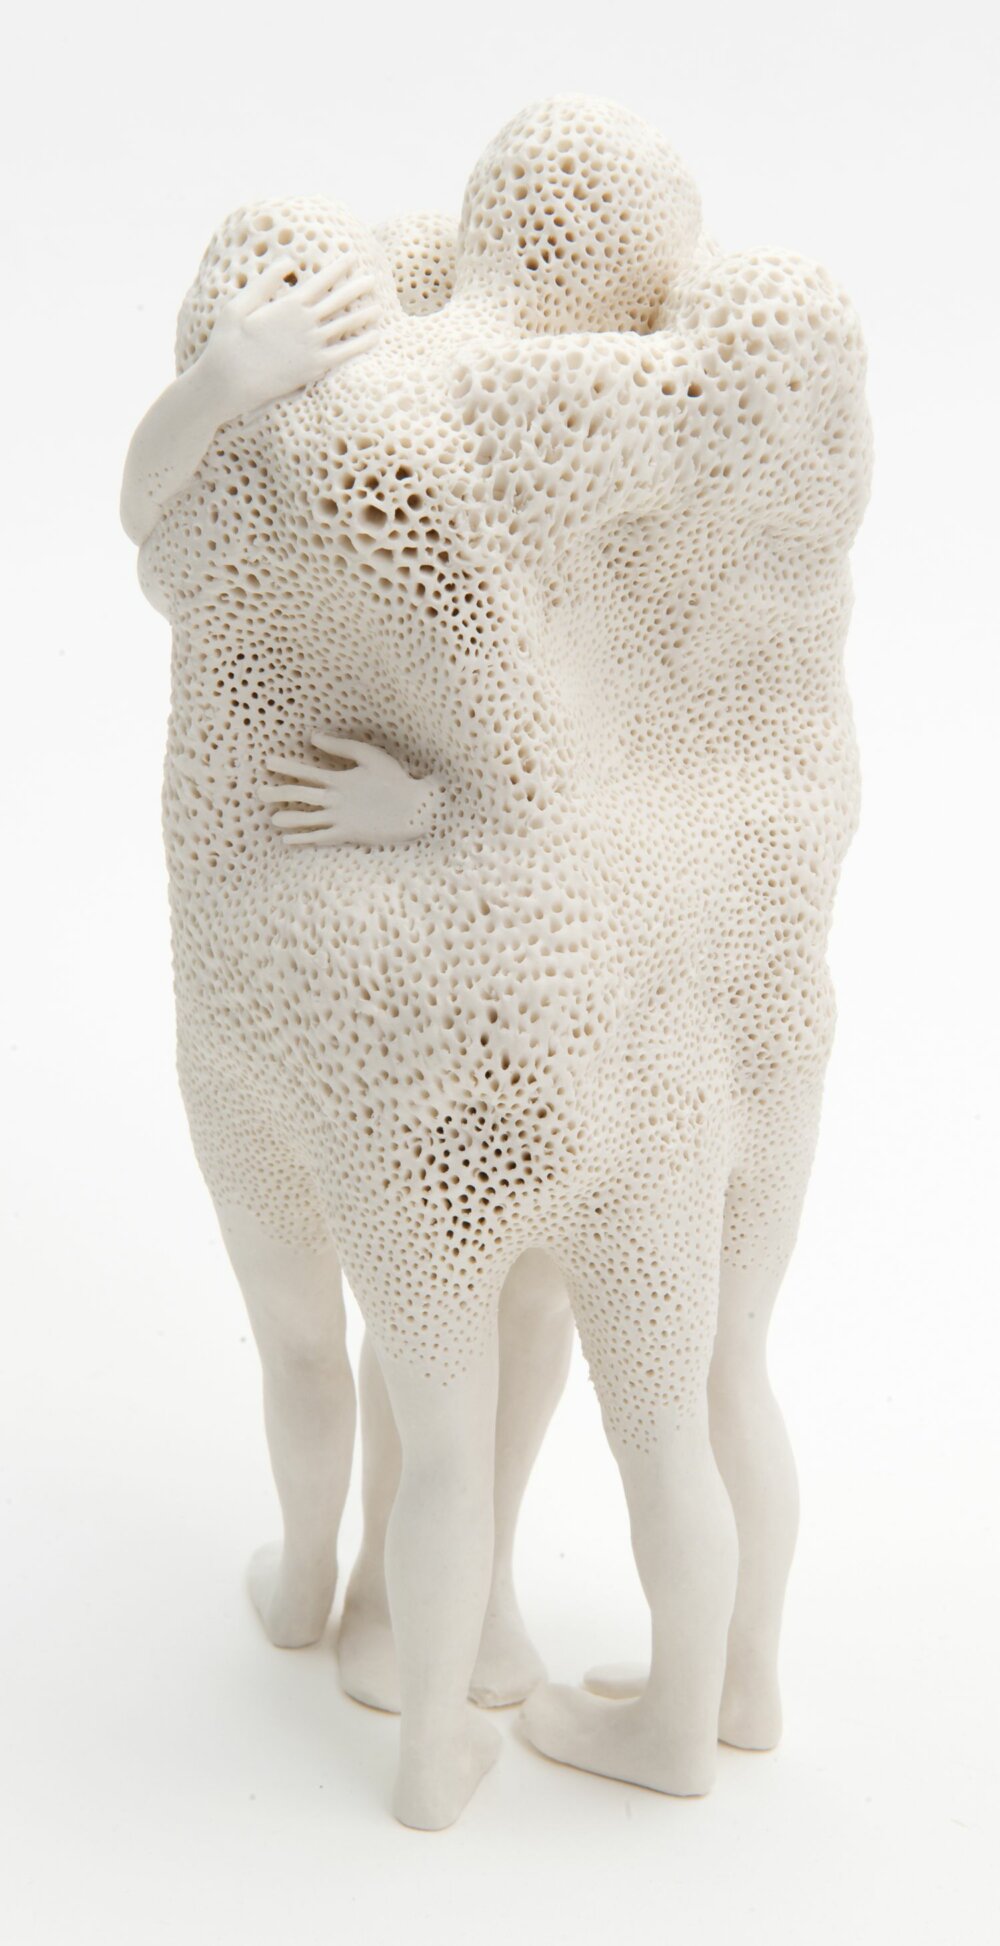 The Surreal Sculptures Of Figures Fused With Organic Forms By Claudia Fontes 1